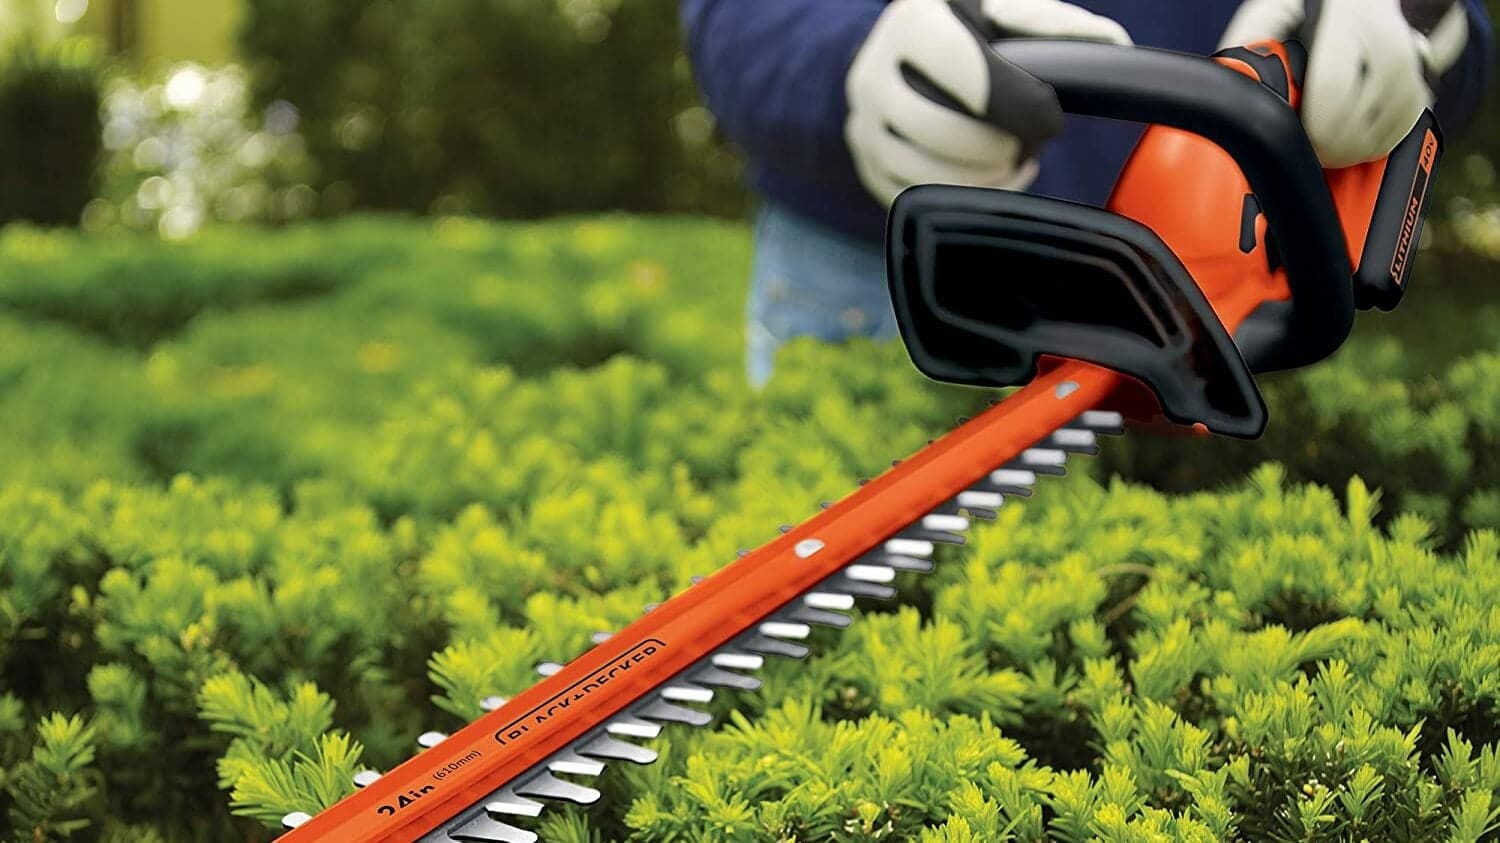 The Best Cordless Hedge Trimmers (Review & Buying Guide) in 2022